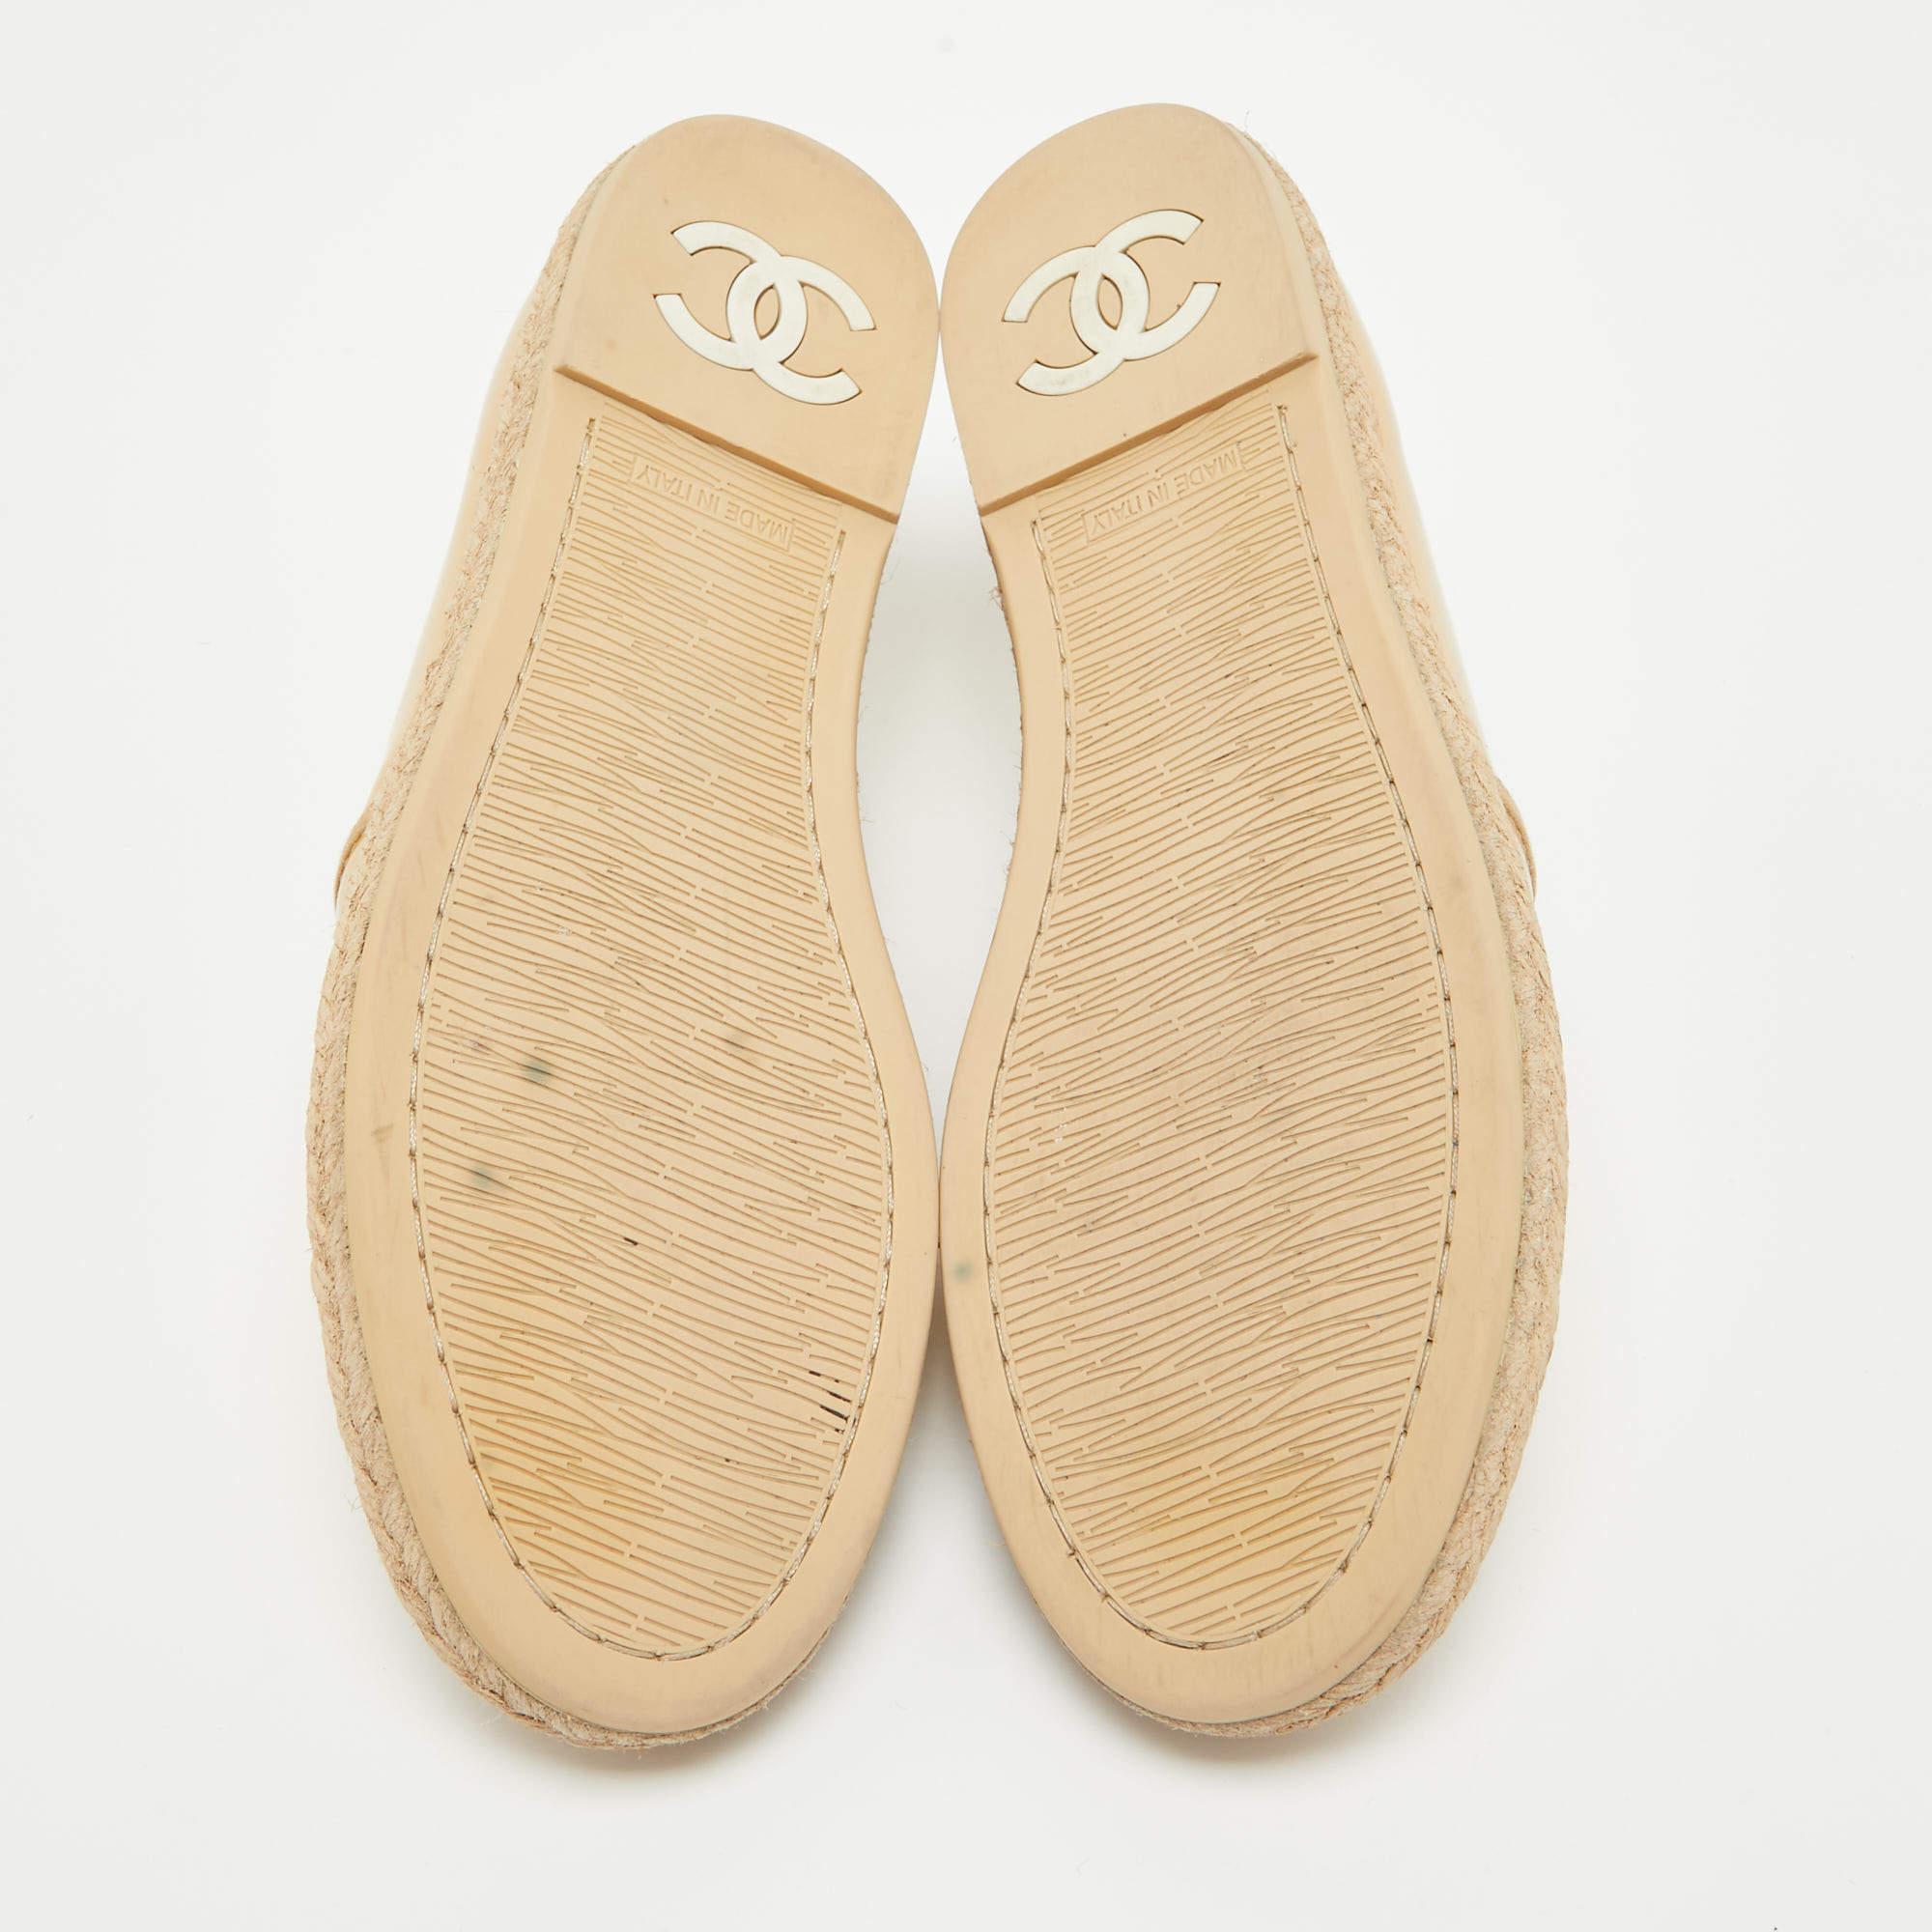 Chanel Beige Patent Leather CC Espadrille Loafers Size 36.5 4